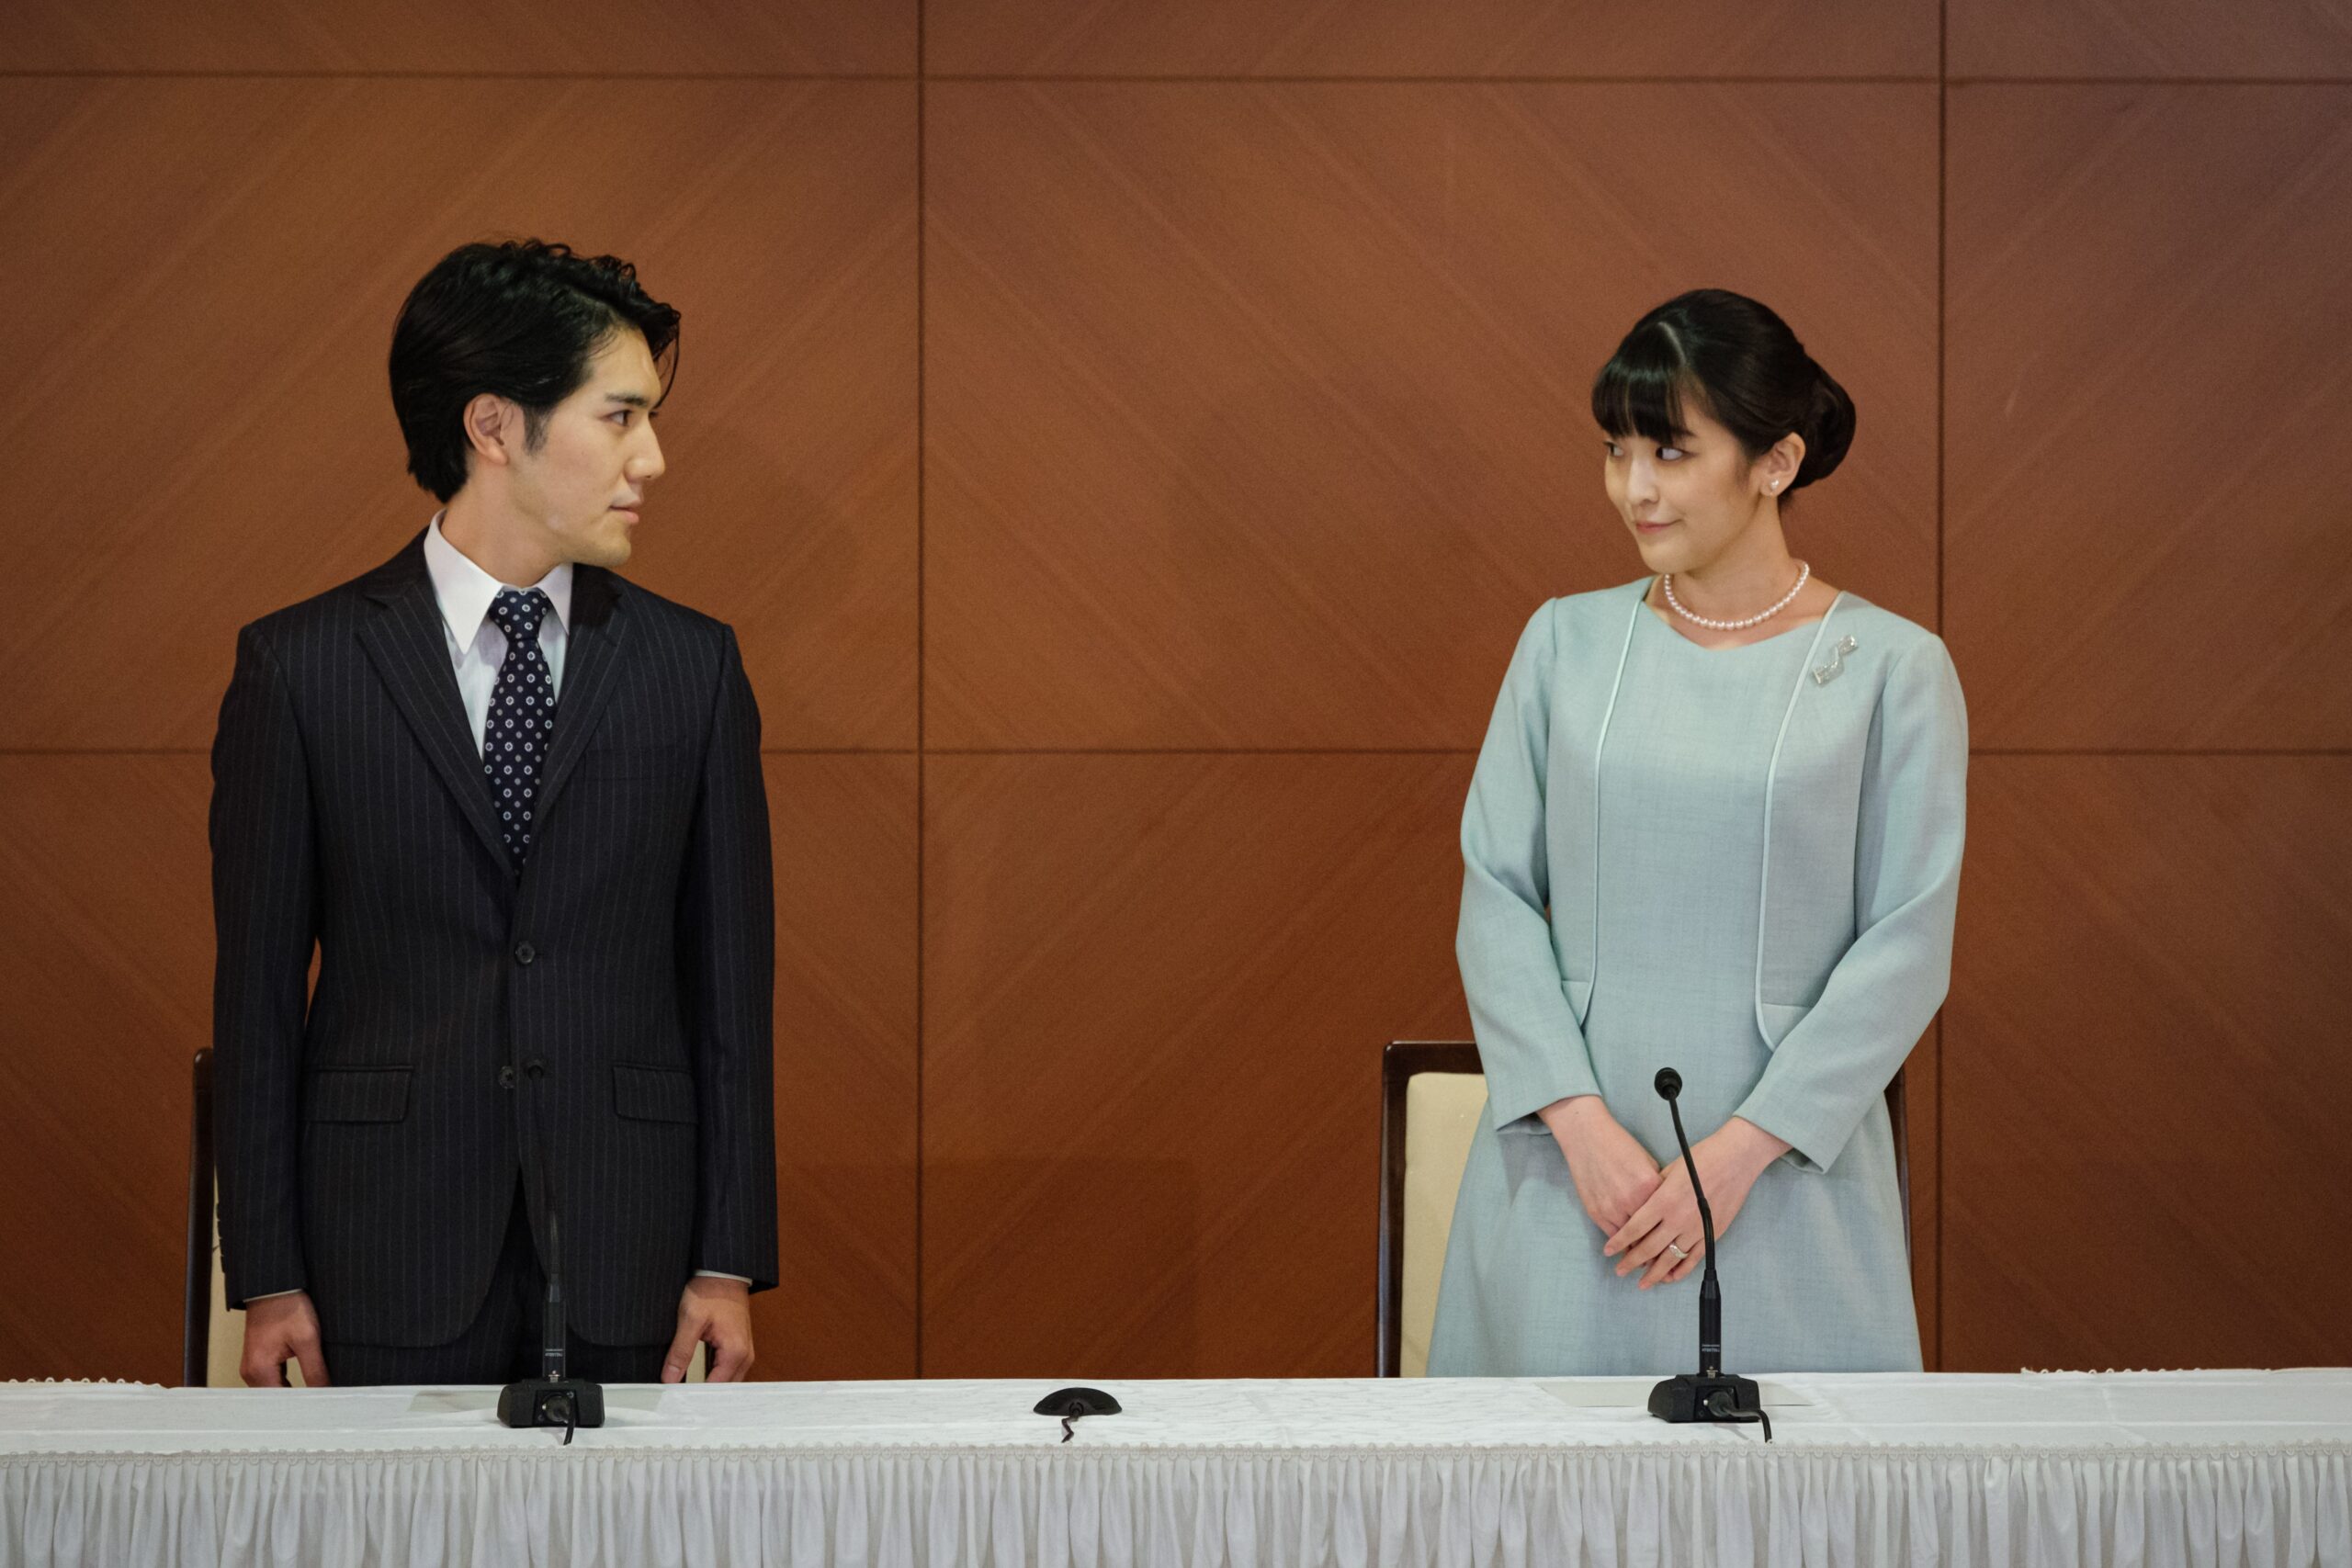 Japan’s Princess Mako Is Finally Married. Will the Controversy End There?